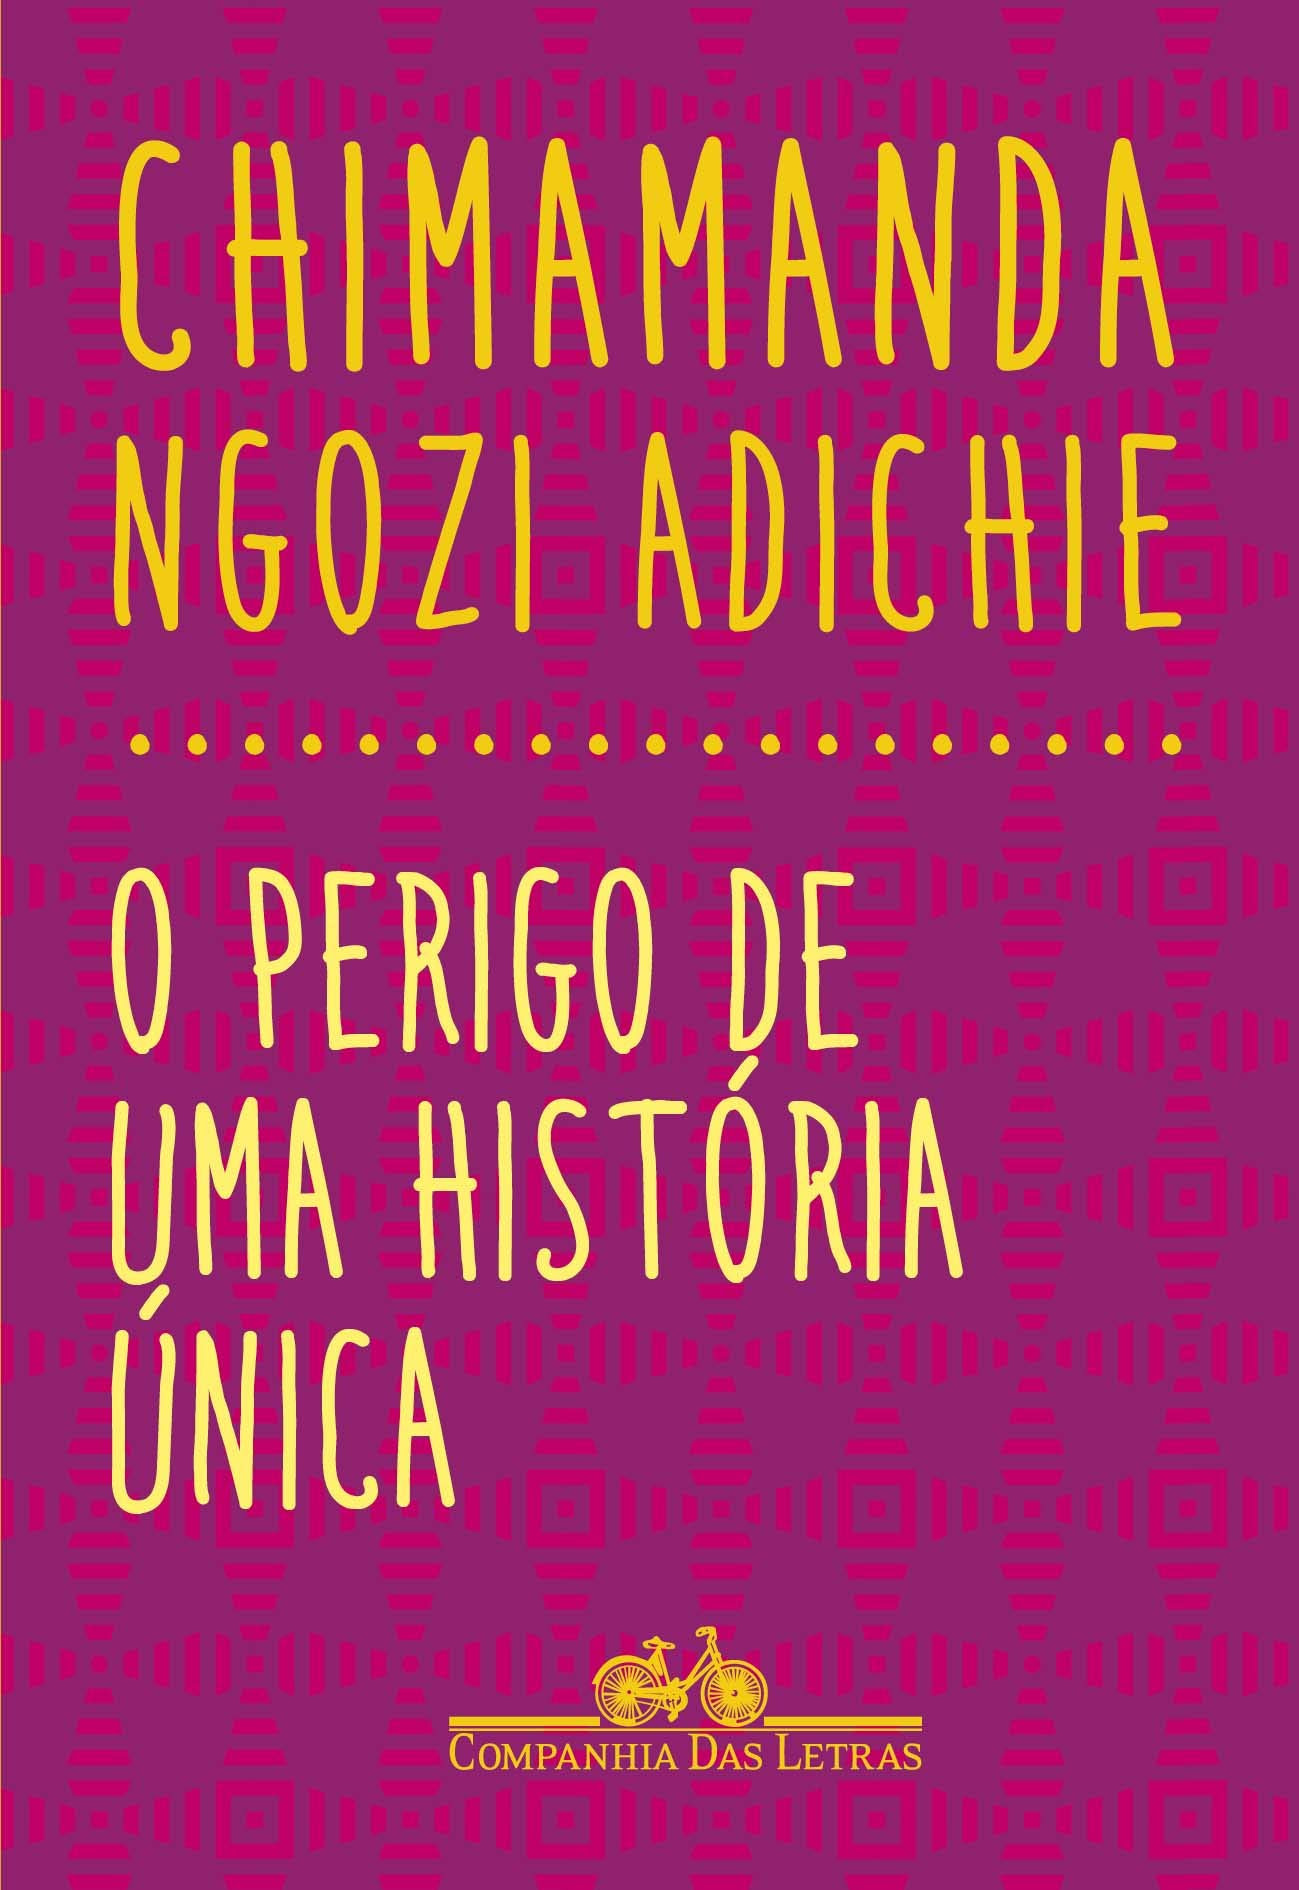 Book cover with a purple background and the writing in shades of yellow “Chimamanda Ngozi Adichie” and “The danger of a unique story”. Below is the Companhia das Letras logo.